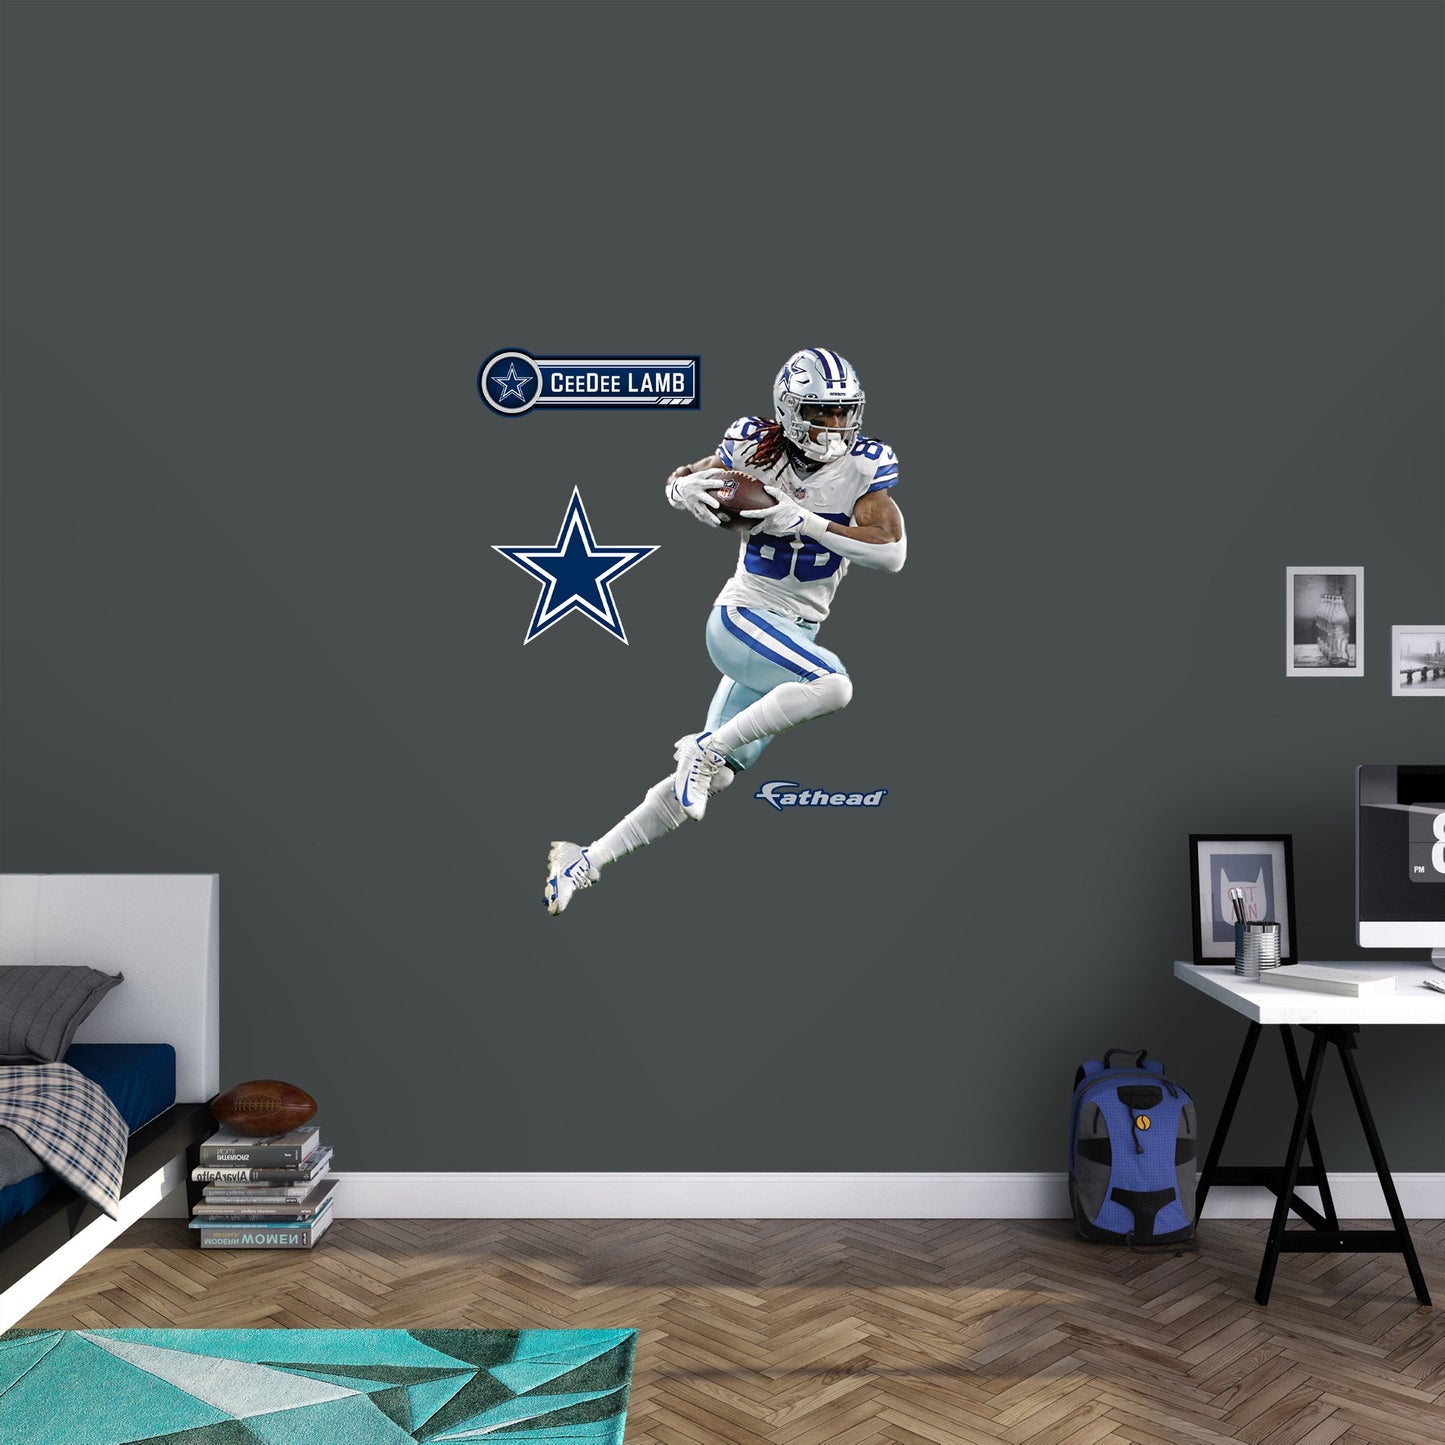 Dallas Cowboys: CeeDee Lamb         - Officially Licensed NFL Removable     Adhesive Decal